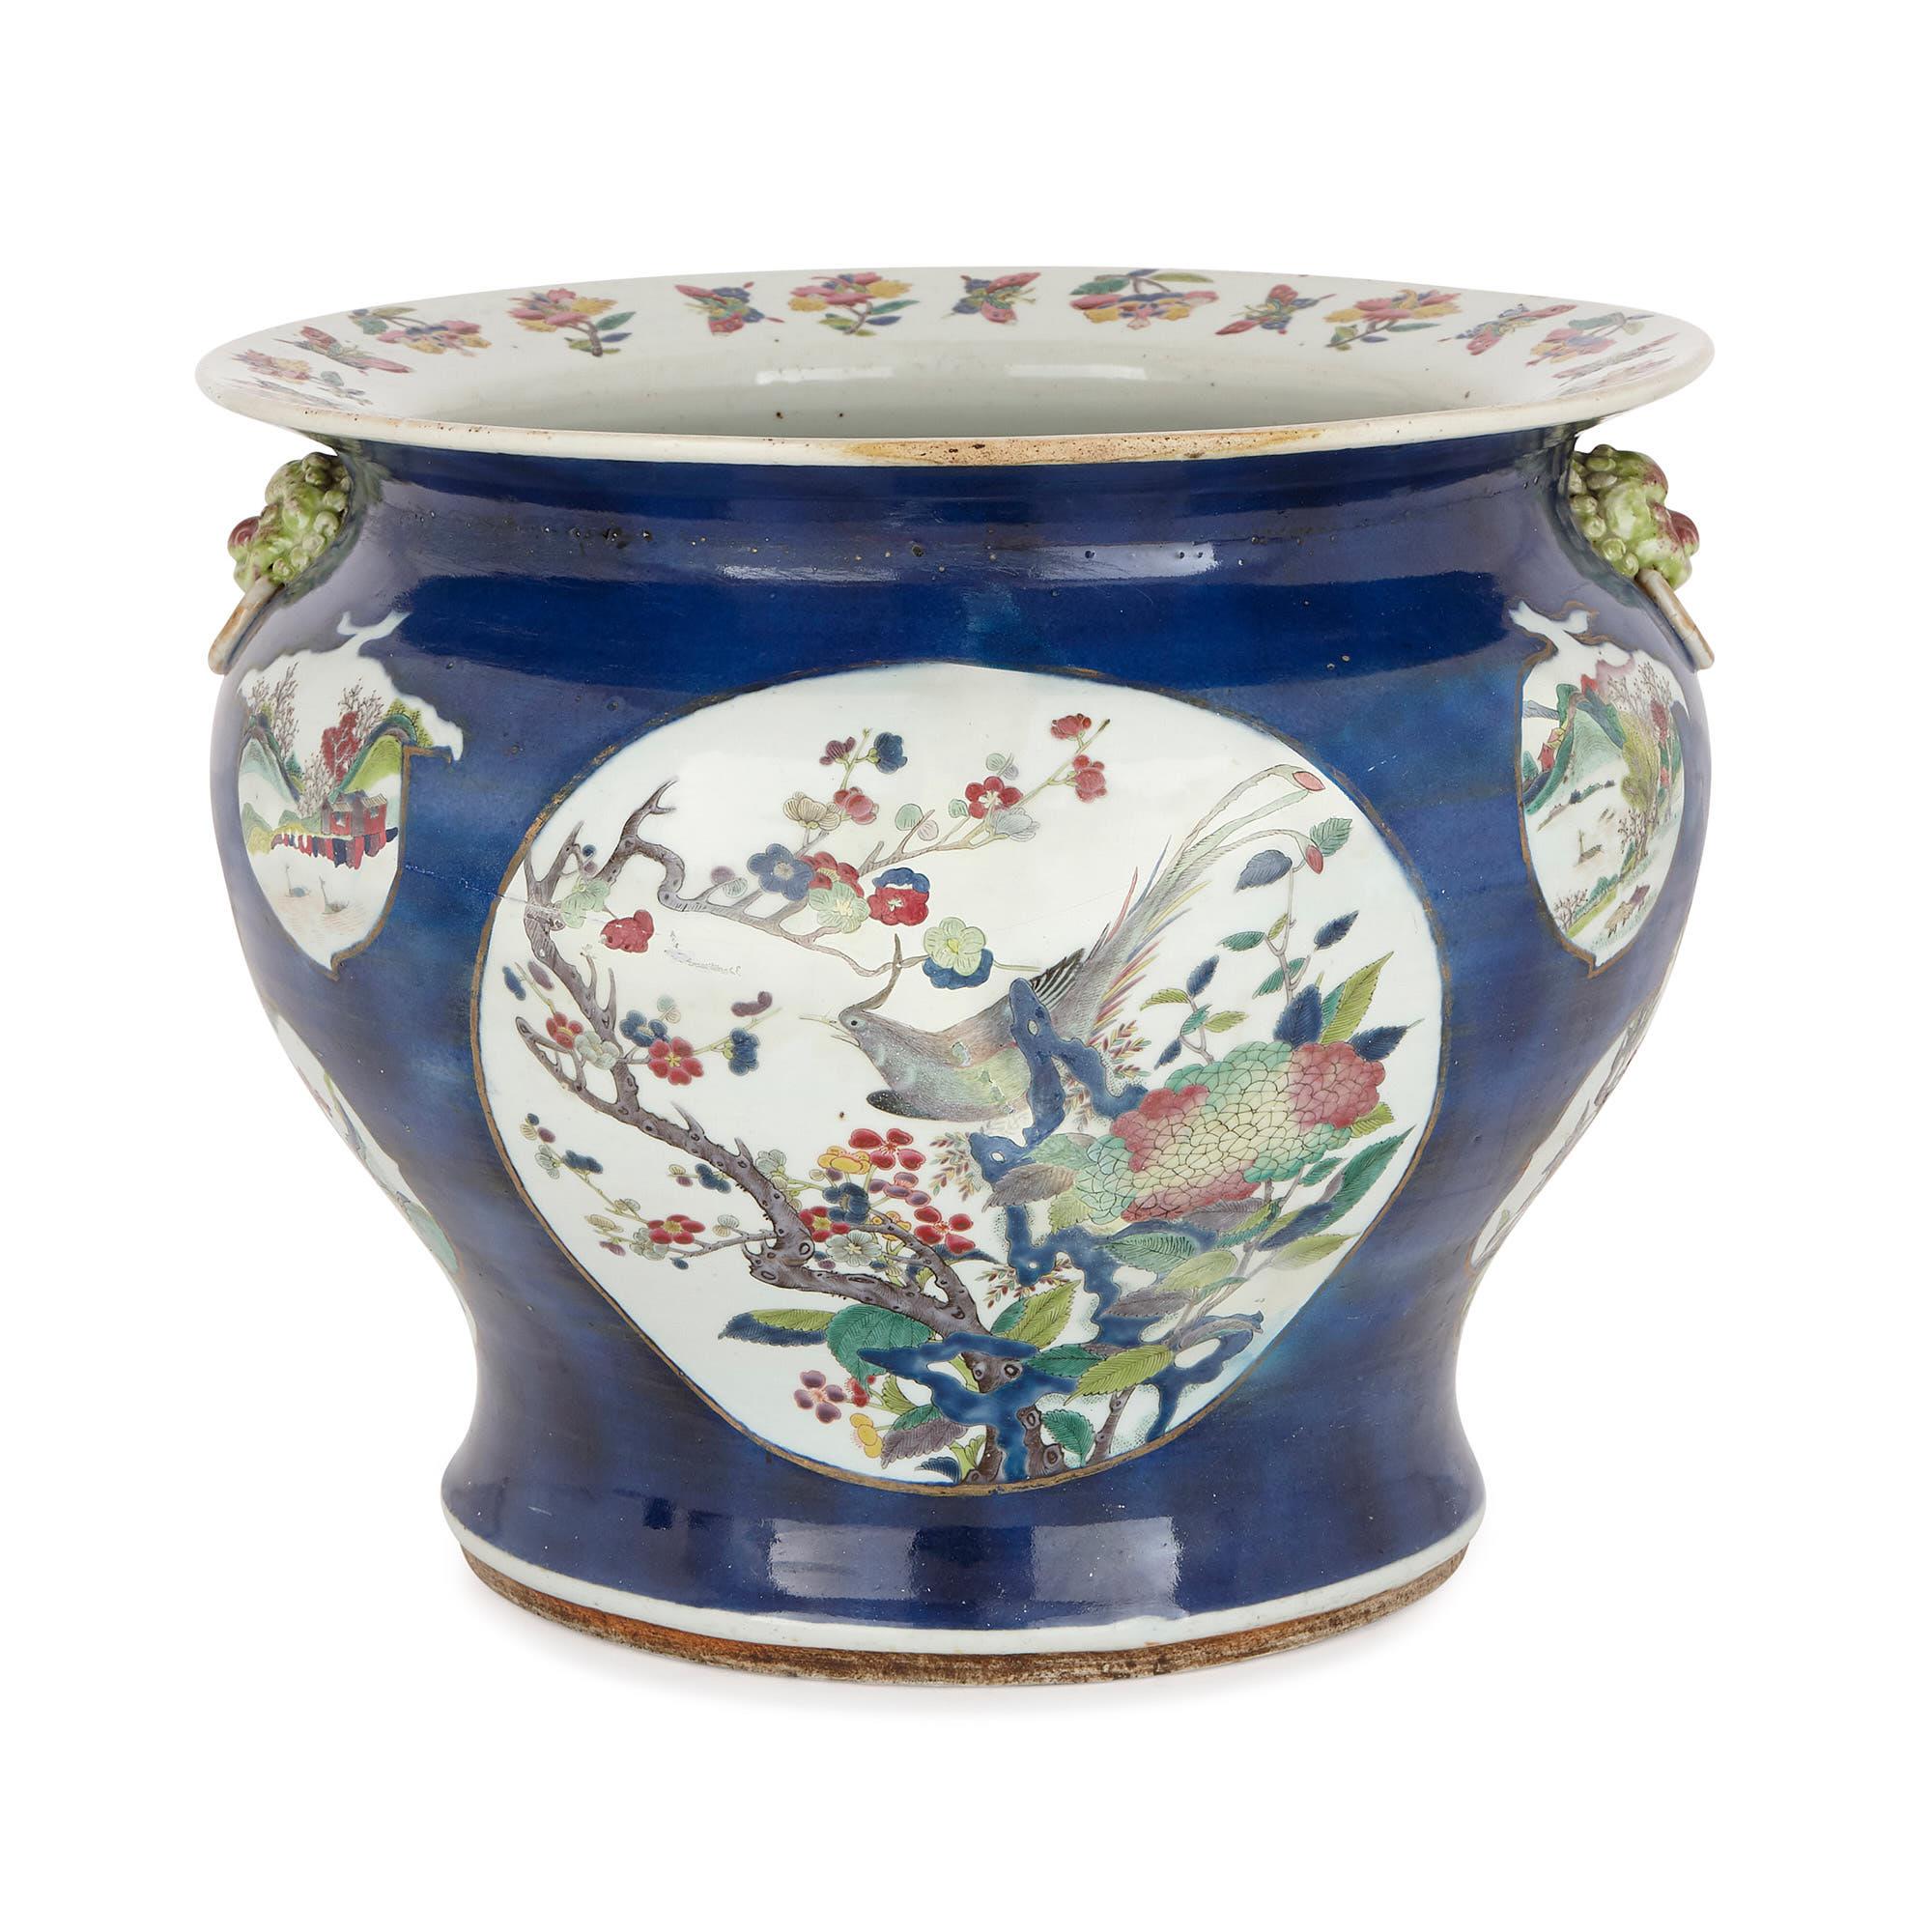 This beautiful porcelain vase was crafted in China in the 19th century. The vase has a slightly waisted base, a bulbous upper body and broad mouth, with a flared rim. 

The body of the vase is painted with images of Chinese figures, animals,